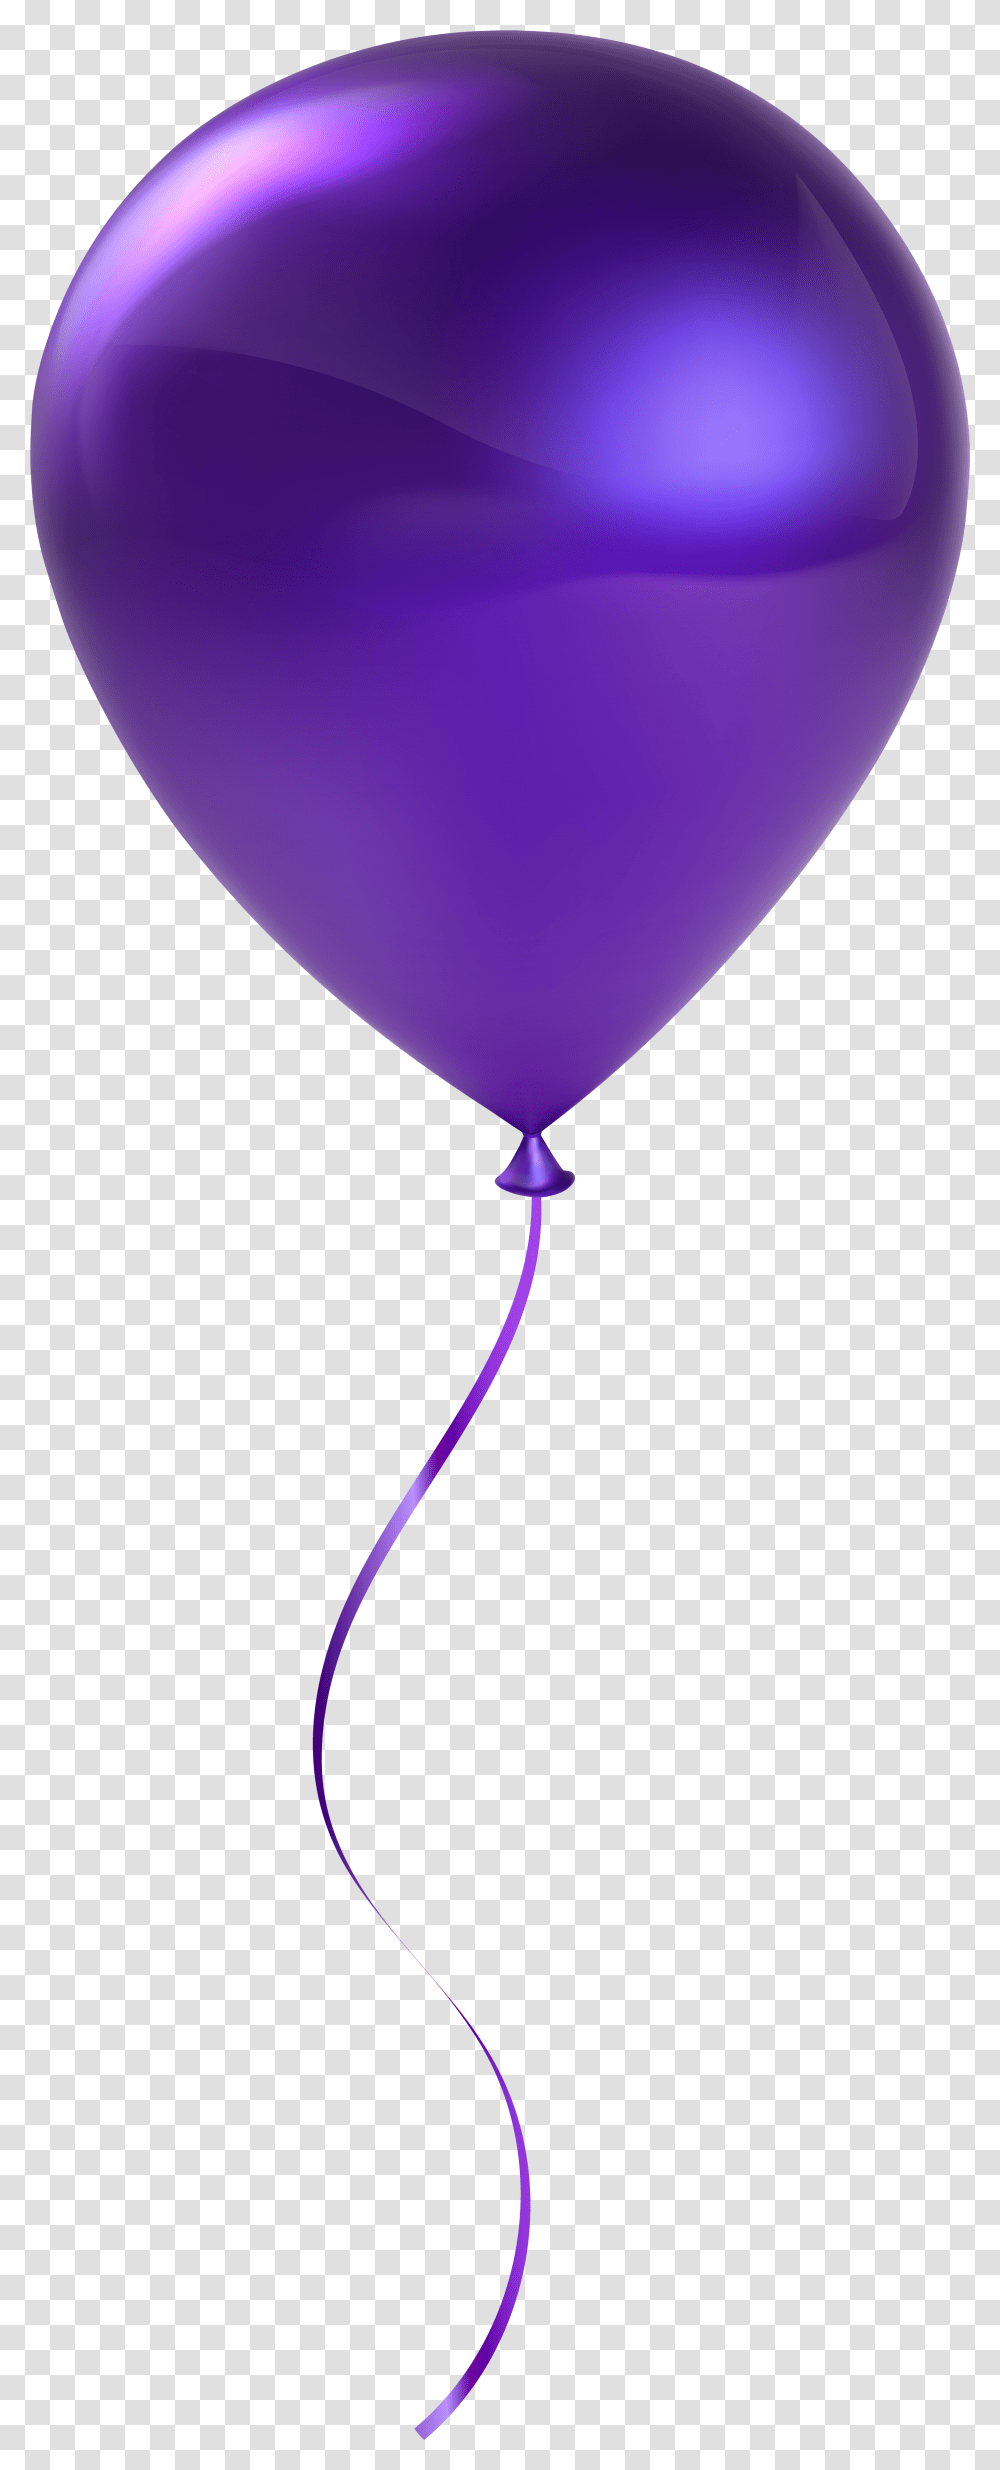 Single Purple Balloon Clip Art Gallery Single Background Balloon Clipart Transparent Png